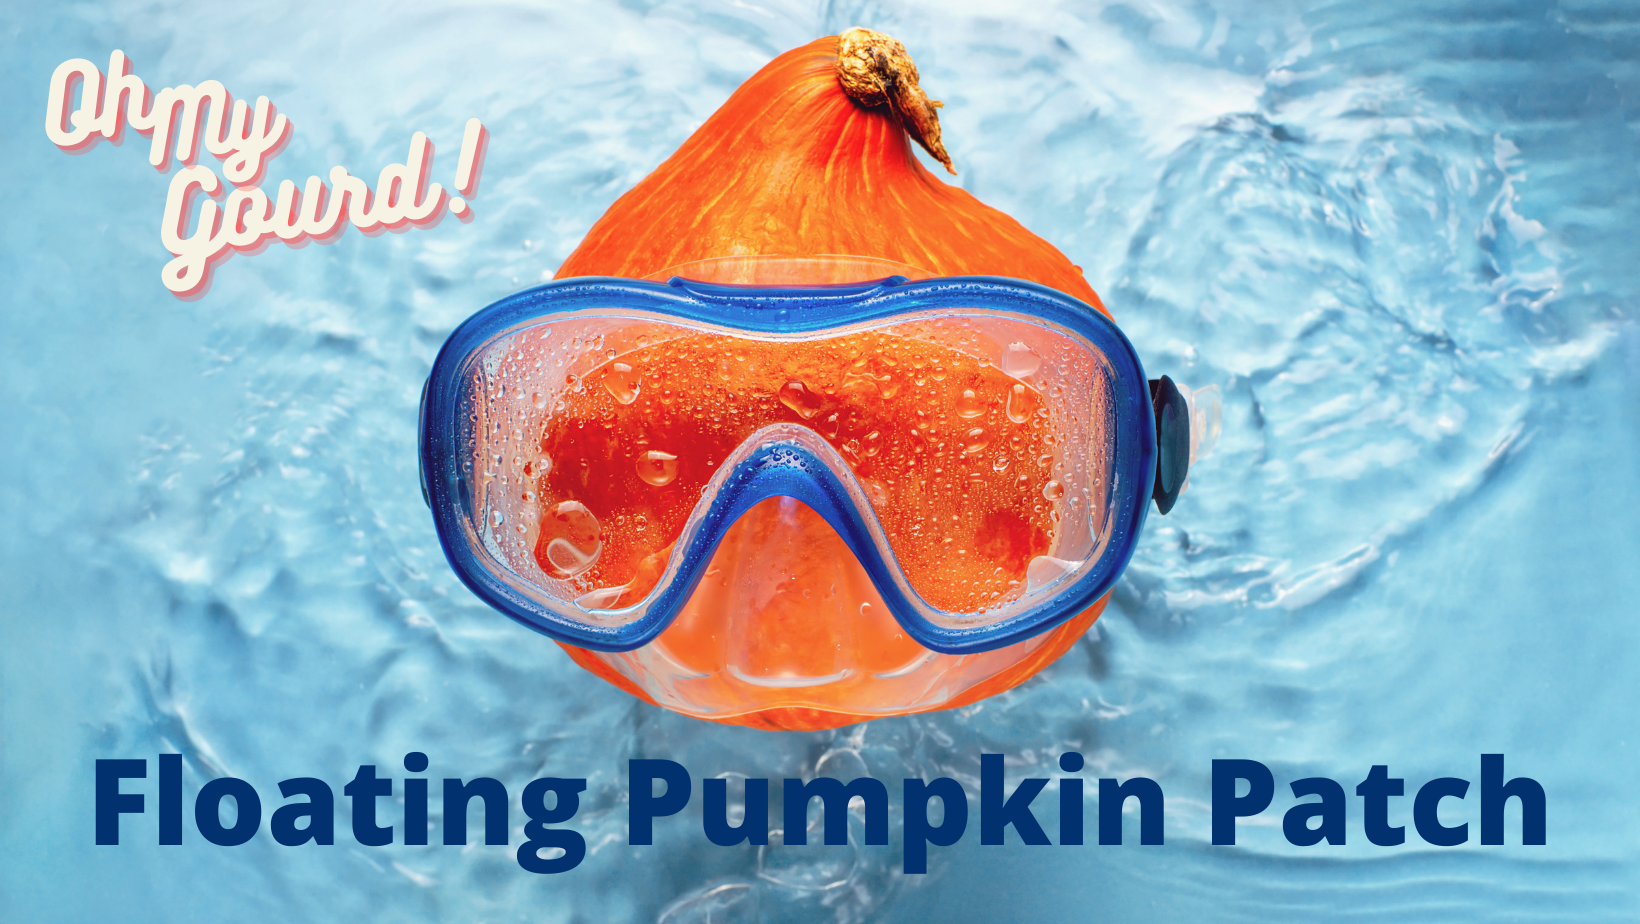 gourd floating in pool with swim googles that says, "Oh My Gourd! Floating Pumpking Patch"